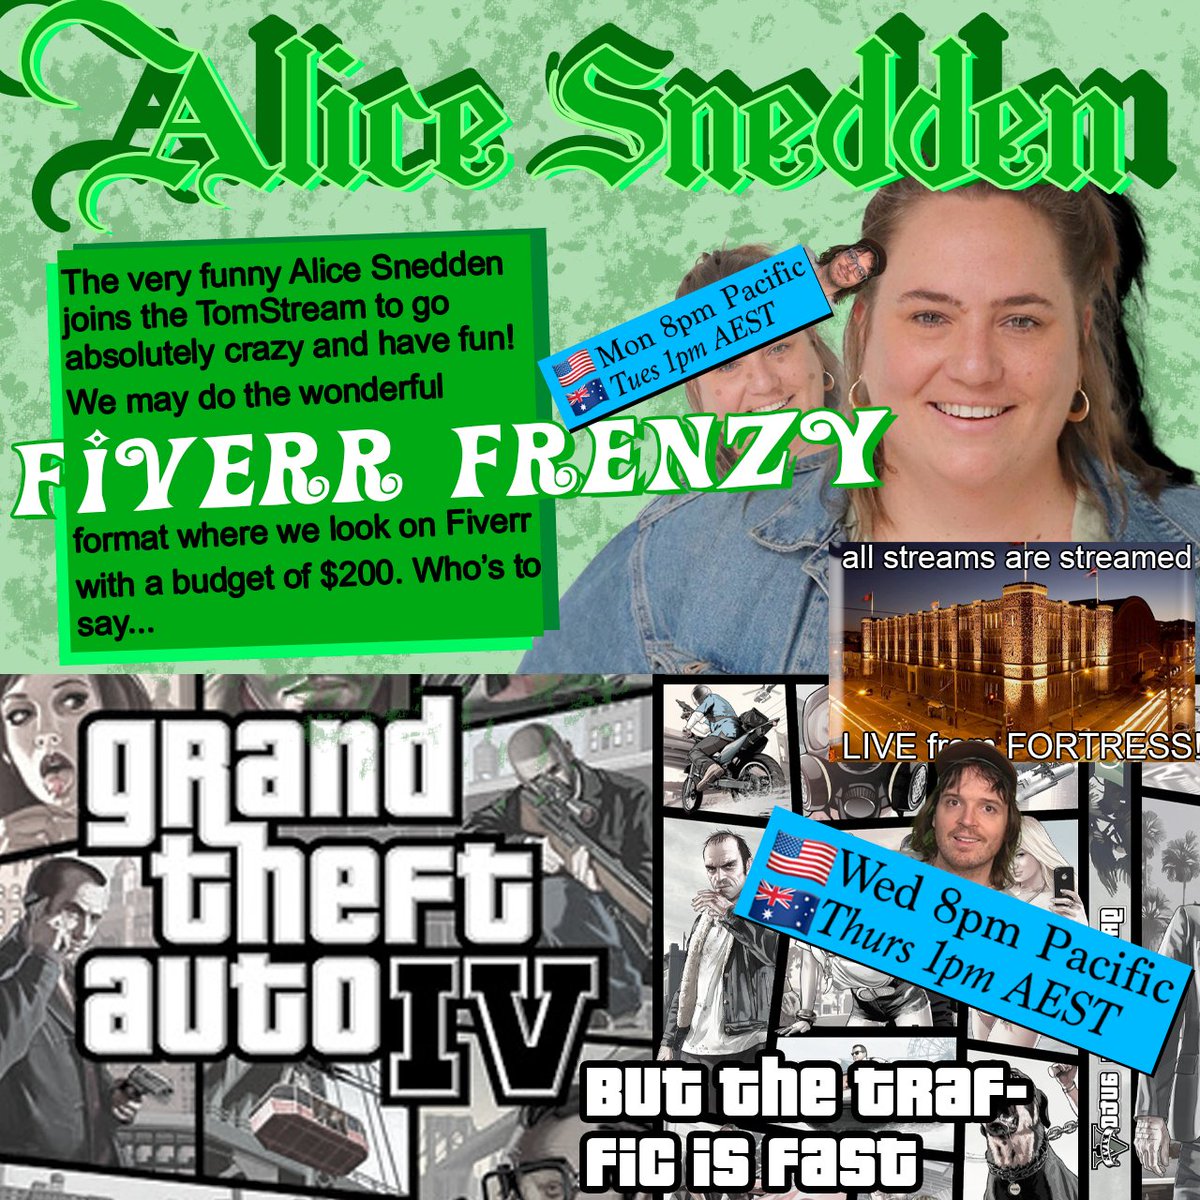 streaming this week with the very funny Alice Snedden and then some fast traffic GTA 4! all over at twitch.tv/TomWalker